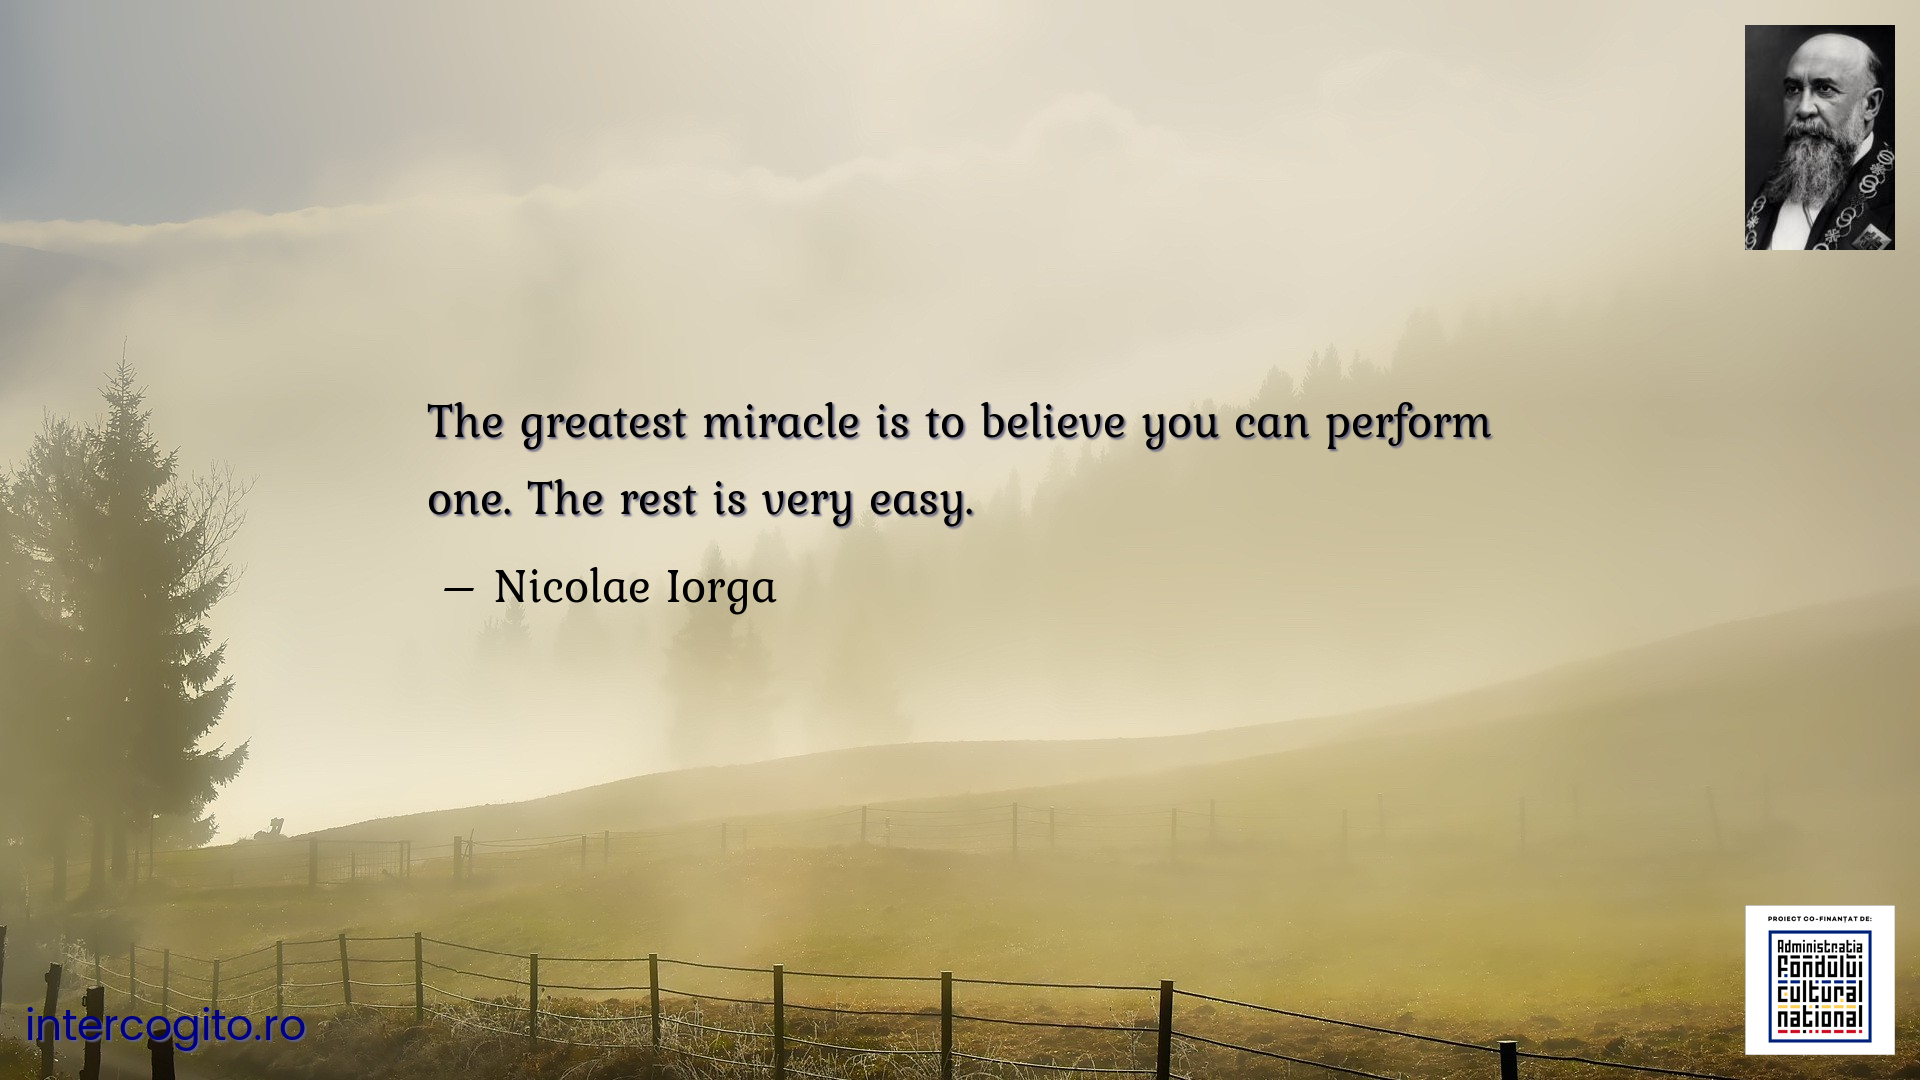 The greatest miracle is to believe you can perform one. The rest is very easy.